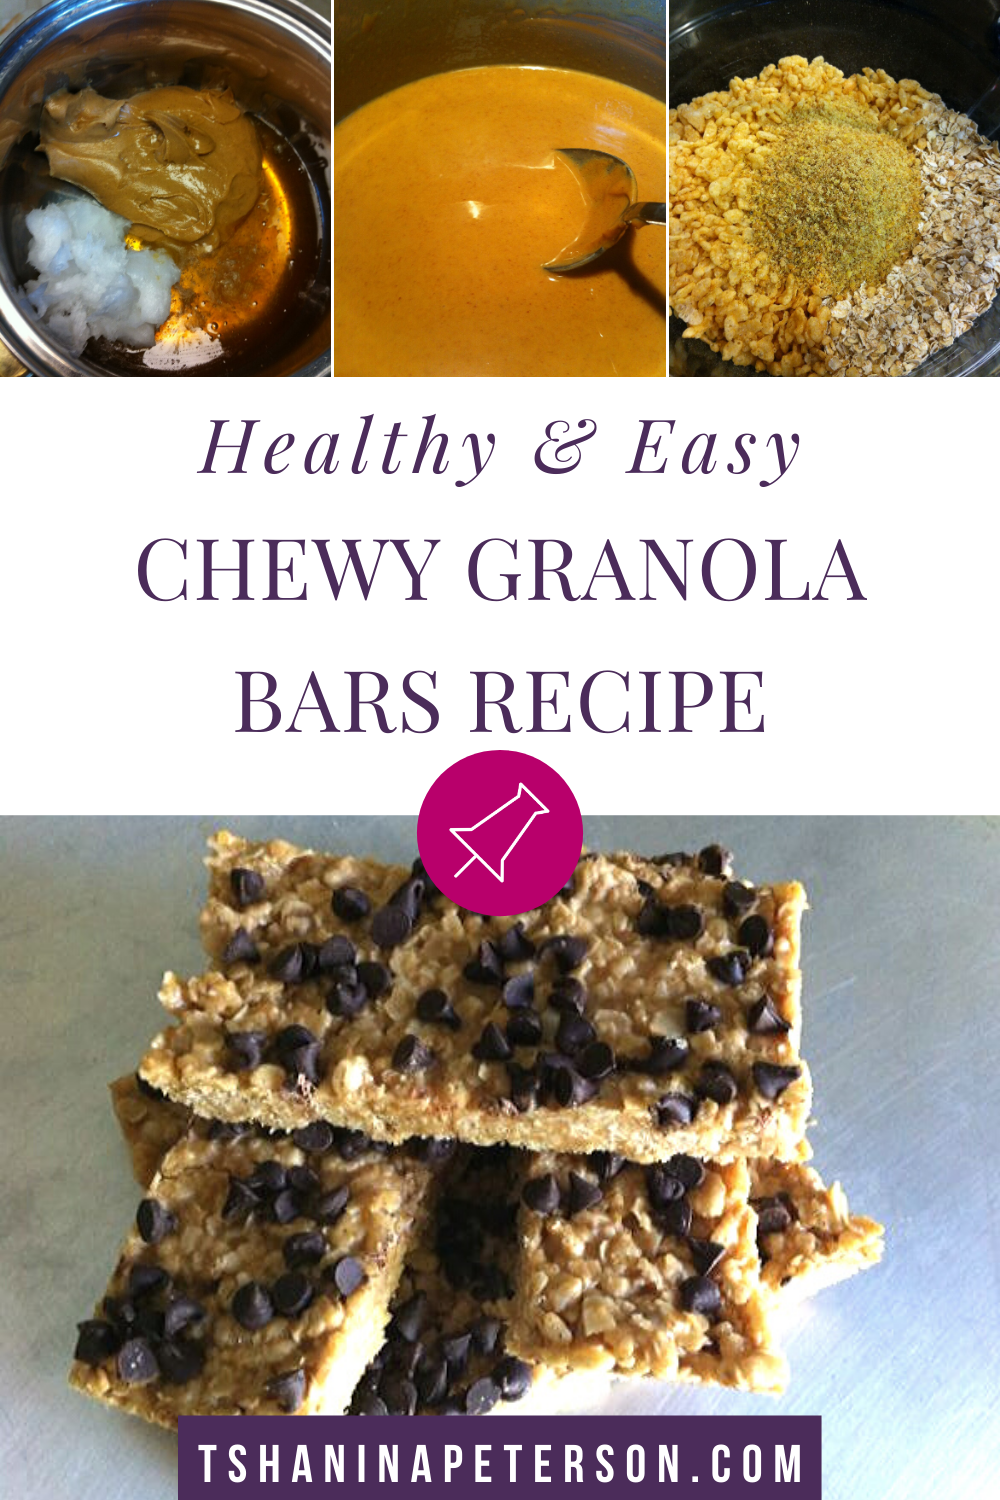 Are you looking for a healthy chewy granola bars recipe that your kids will love? These are simply the best (even better than store bought in my opinion) and my husband loves the crispy crunch from the cereal. Grab your oatmeal (either quick oats or old fashioned will work), honey, coconut oil, peanut butter, rice krispies and chocolate chips and let me show you how to make this super easy no bake recipe!